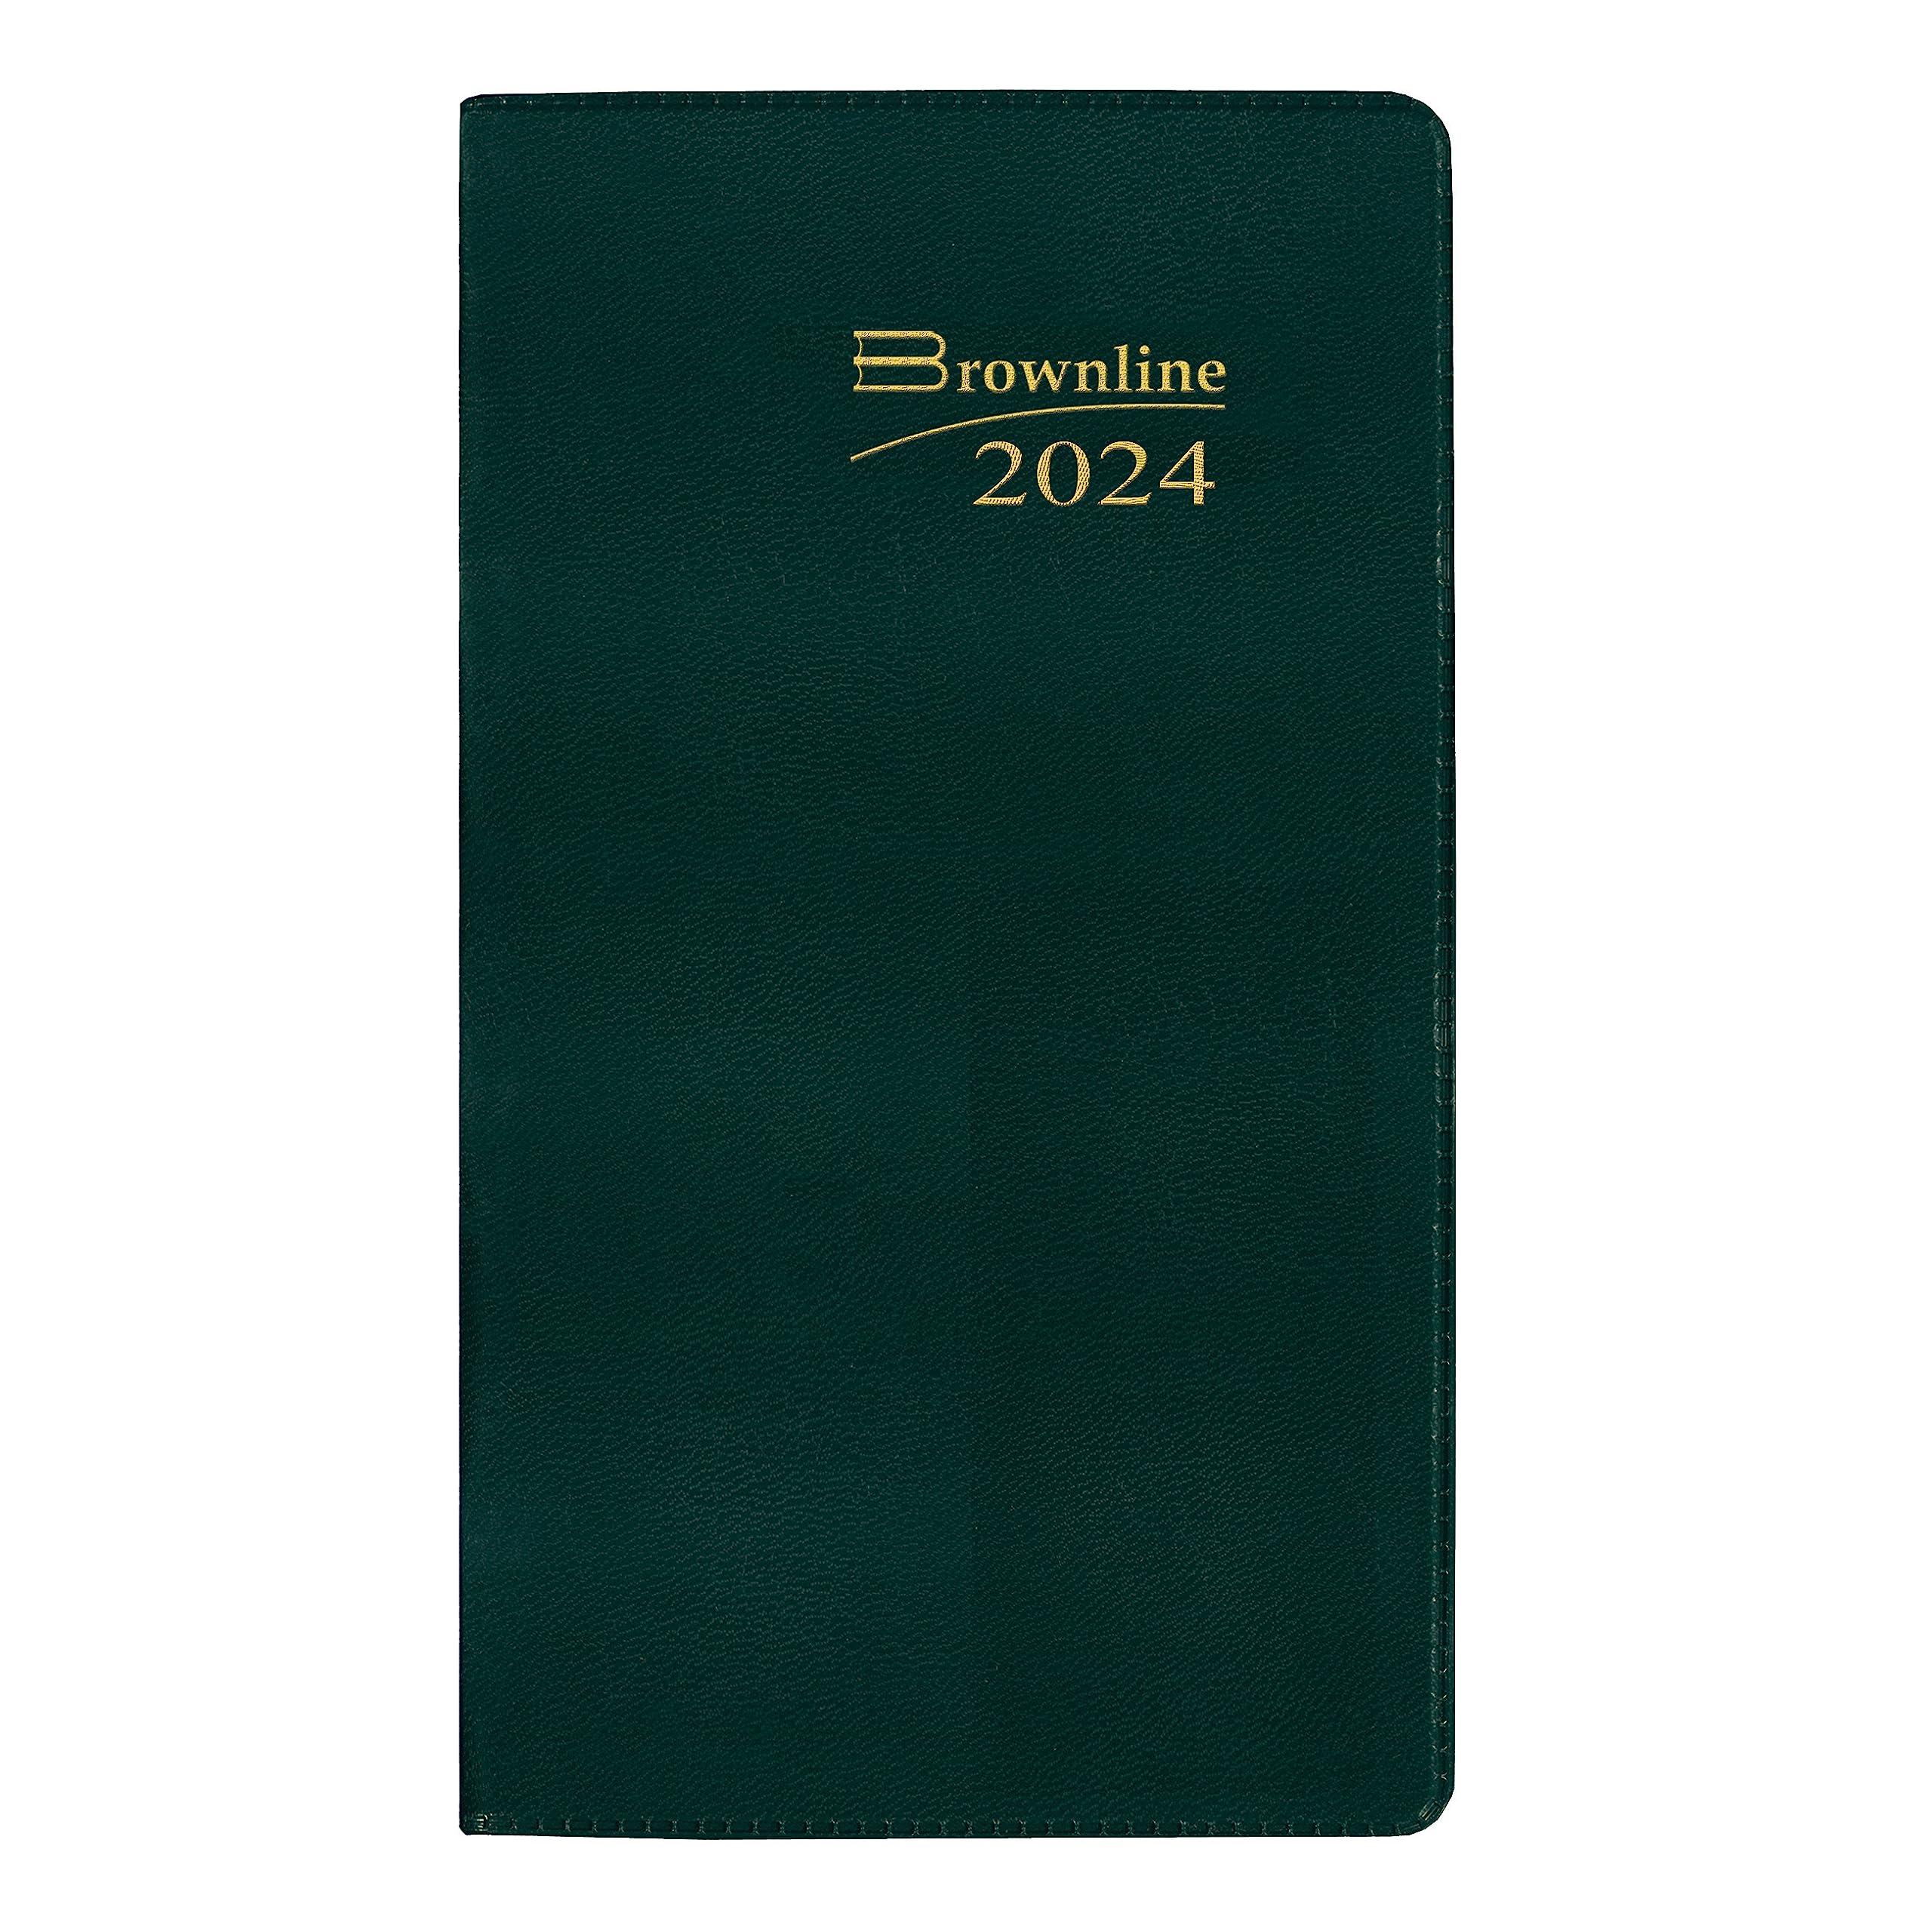 Brownline 2024 Essential Monthly Two-Year Pocket Planner, January 2024 to December 2025, Stitched Binding, 6.5" x 3.5", Assorted Colors (CA24.AST-24)